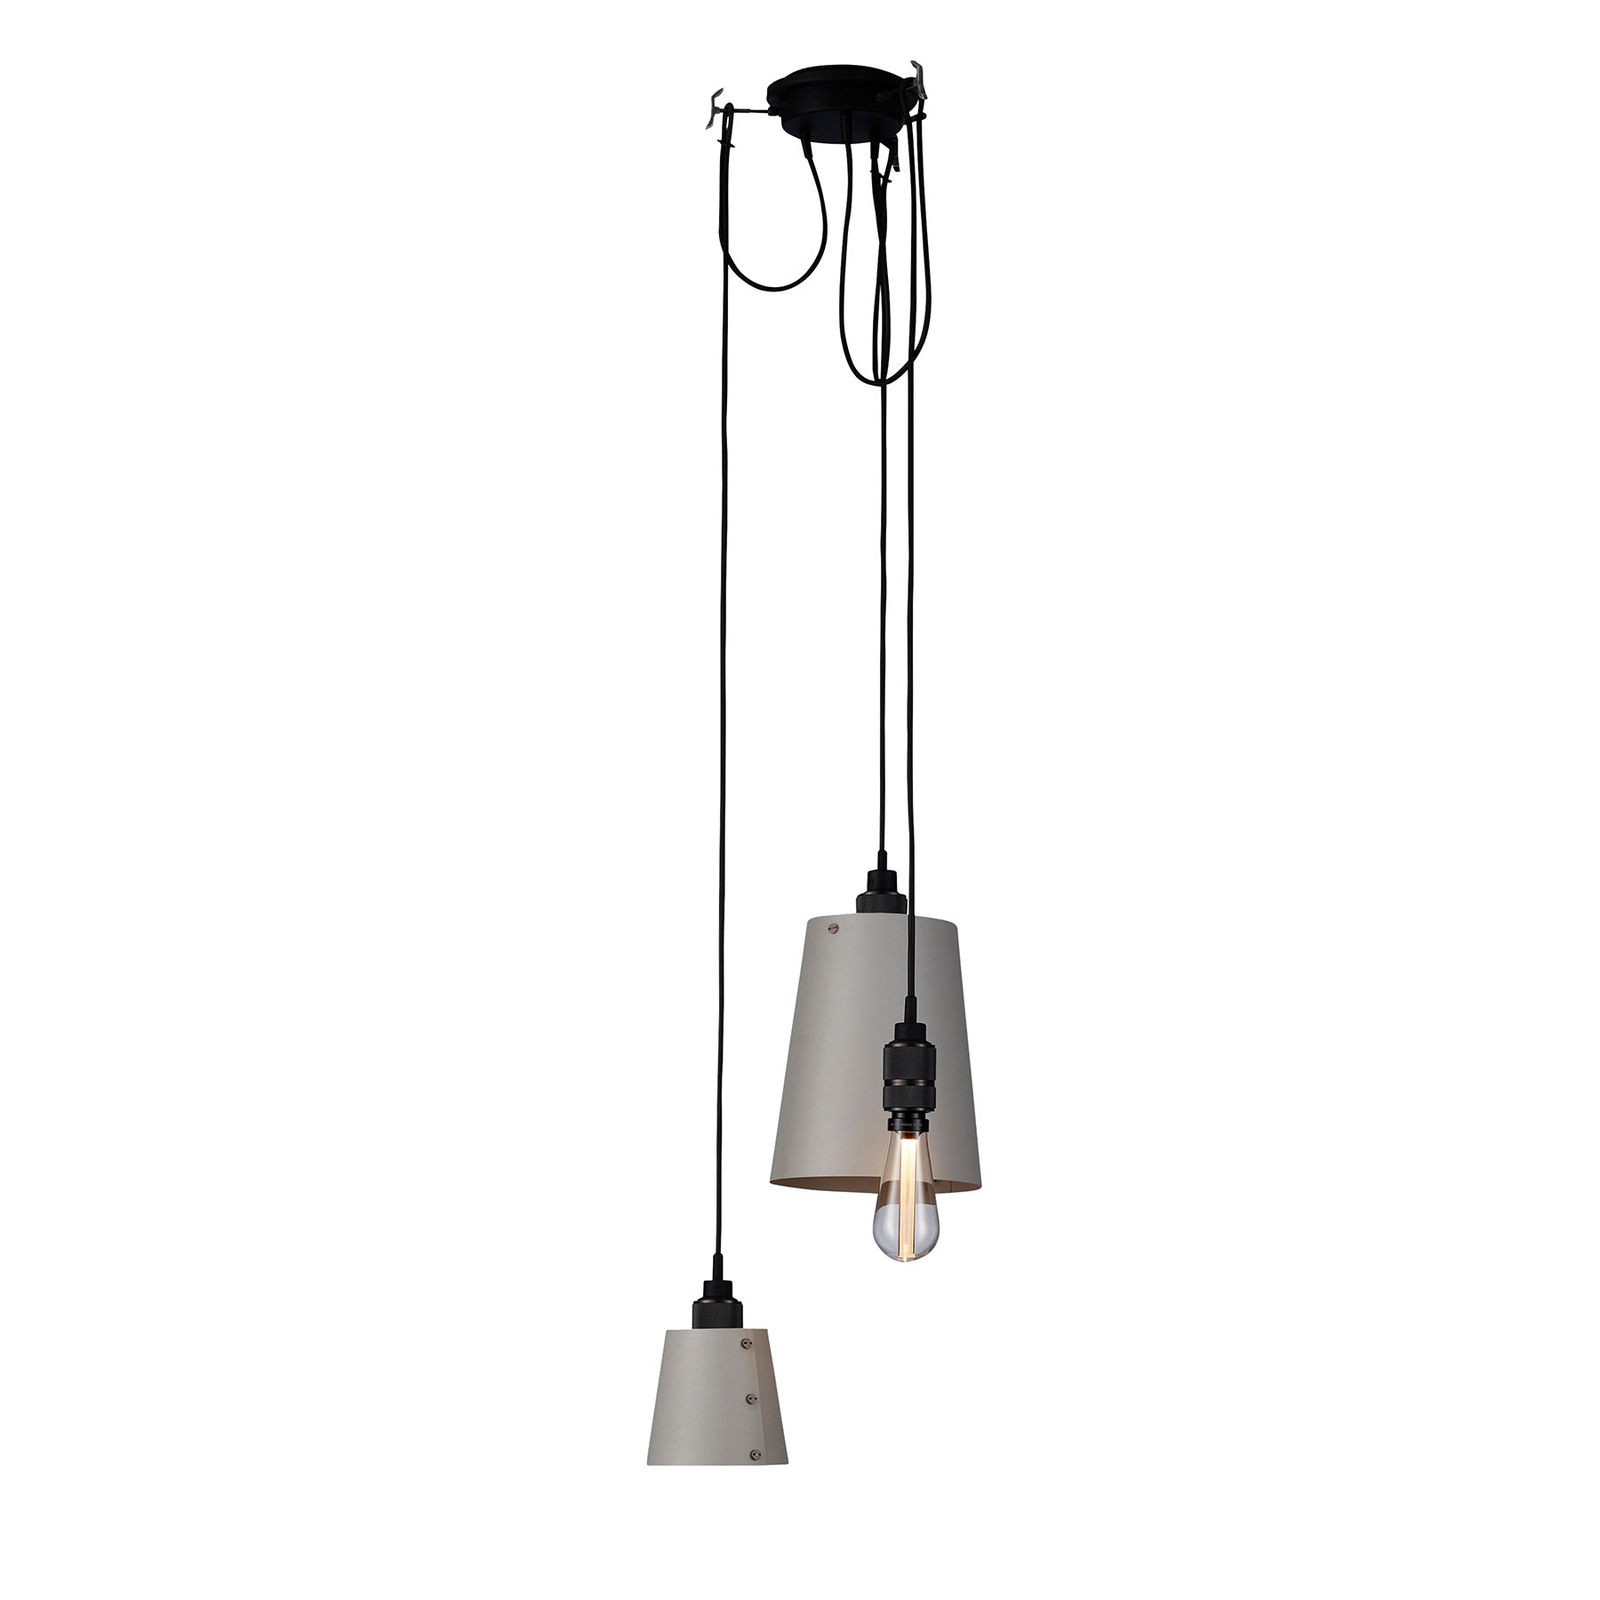 Buster + Punch Hooked 3.0 mix gris/bronze